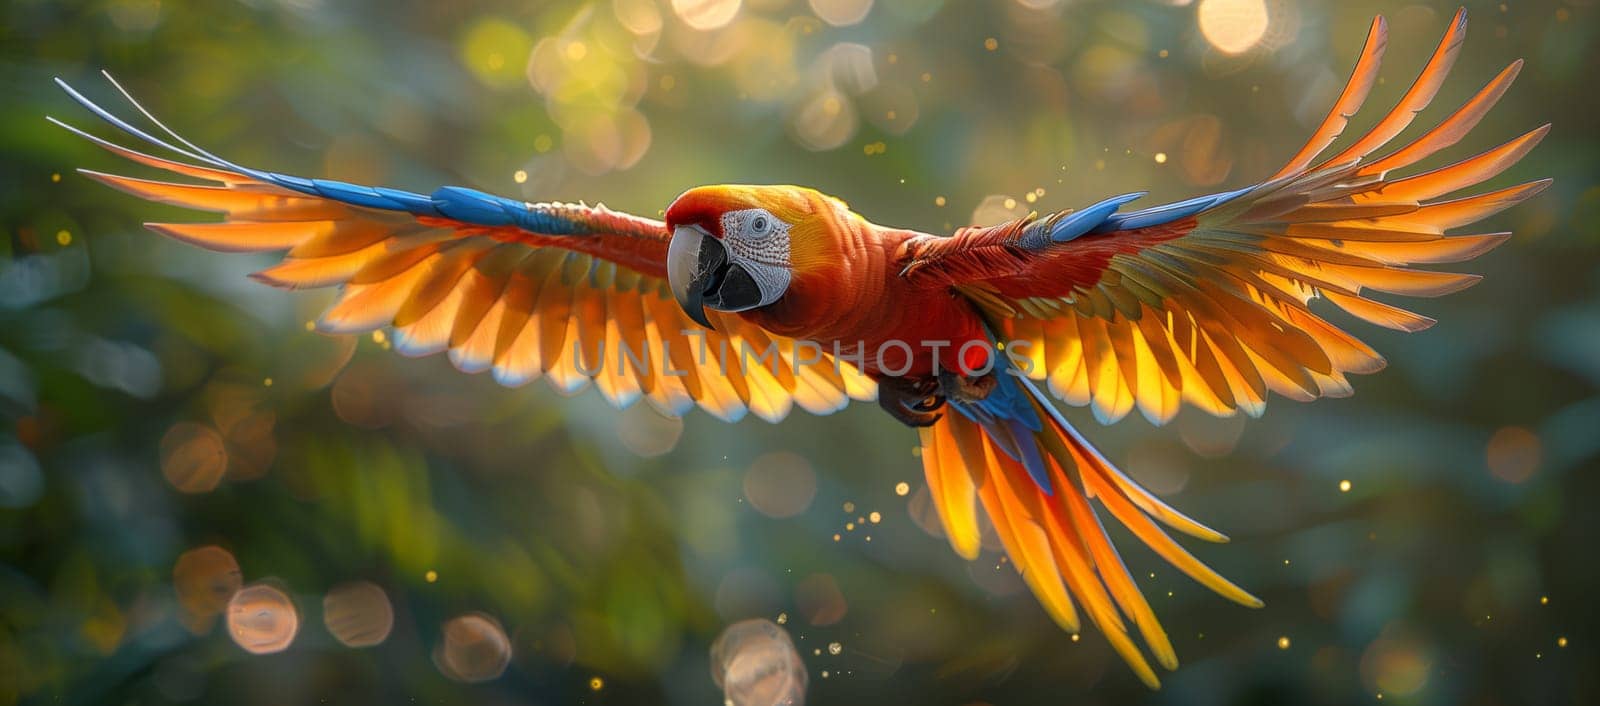 Colorful bird soaring with spread wings in macro wildlife event by richwolf